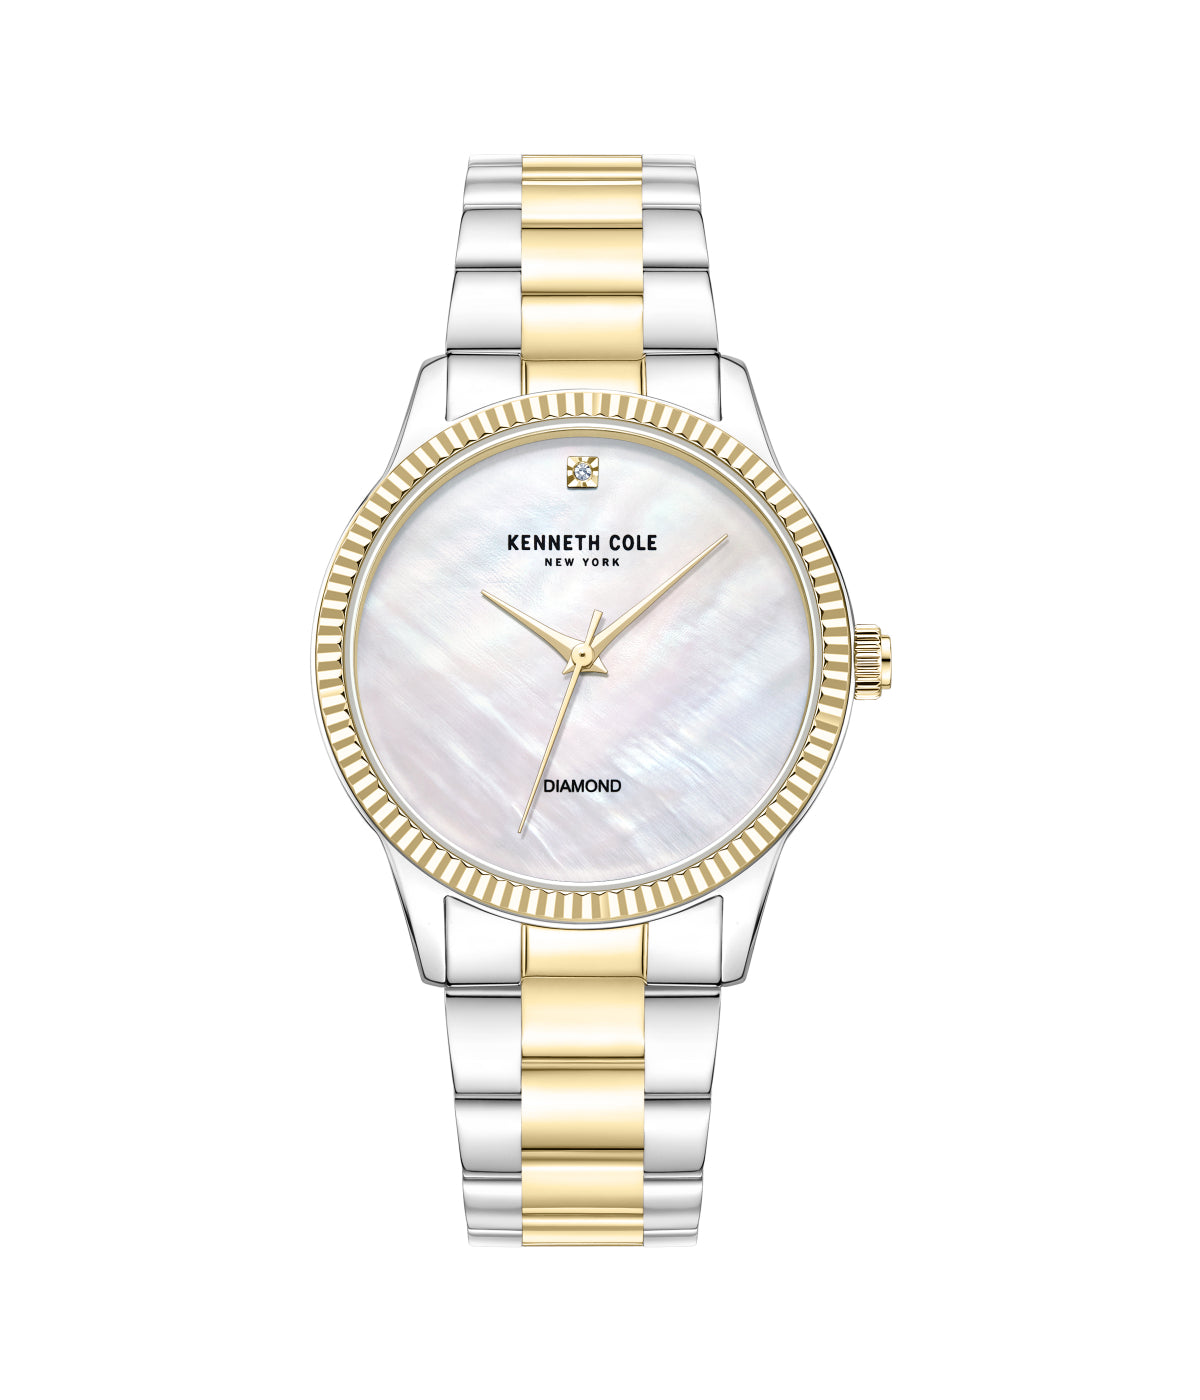 Kenneth Cole New York Diamond Dial Watch Silver & Gold